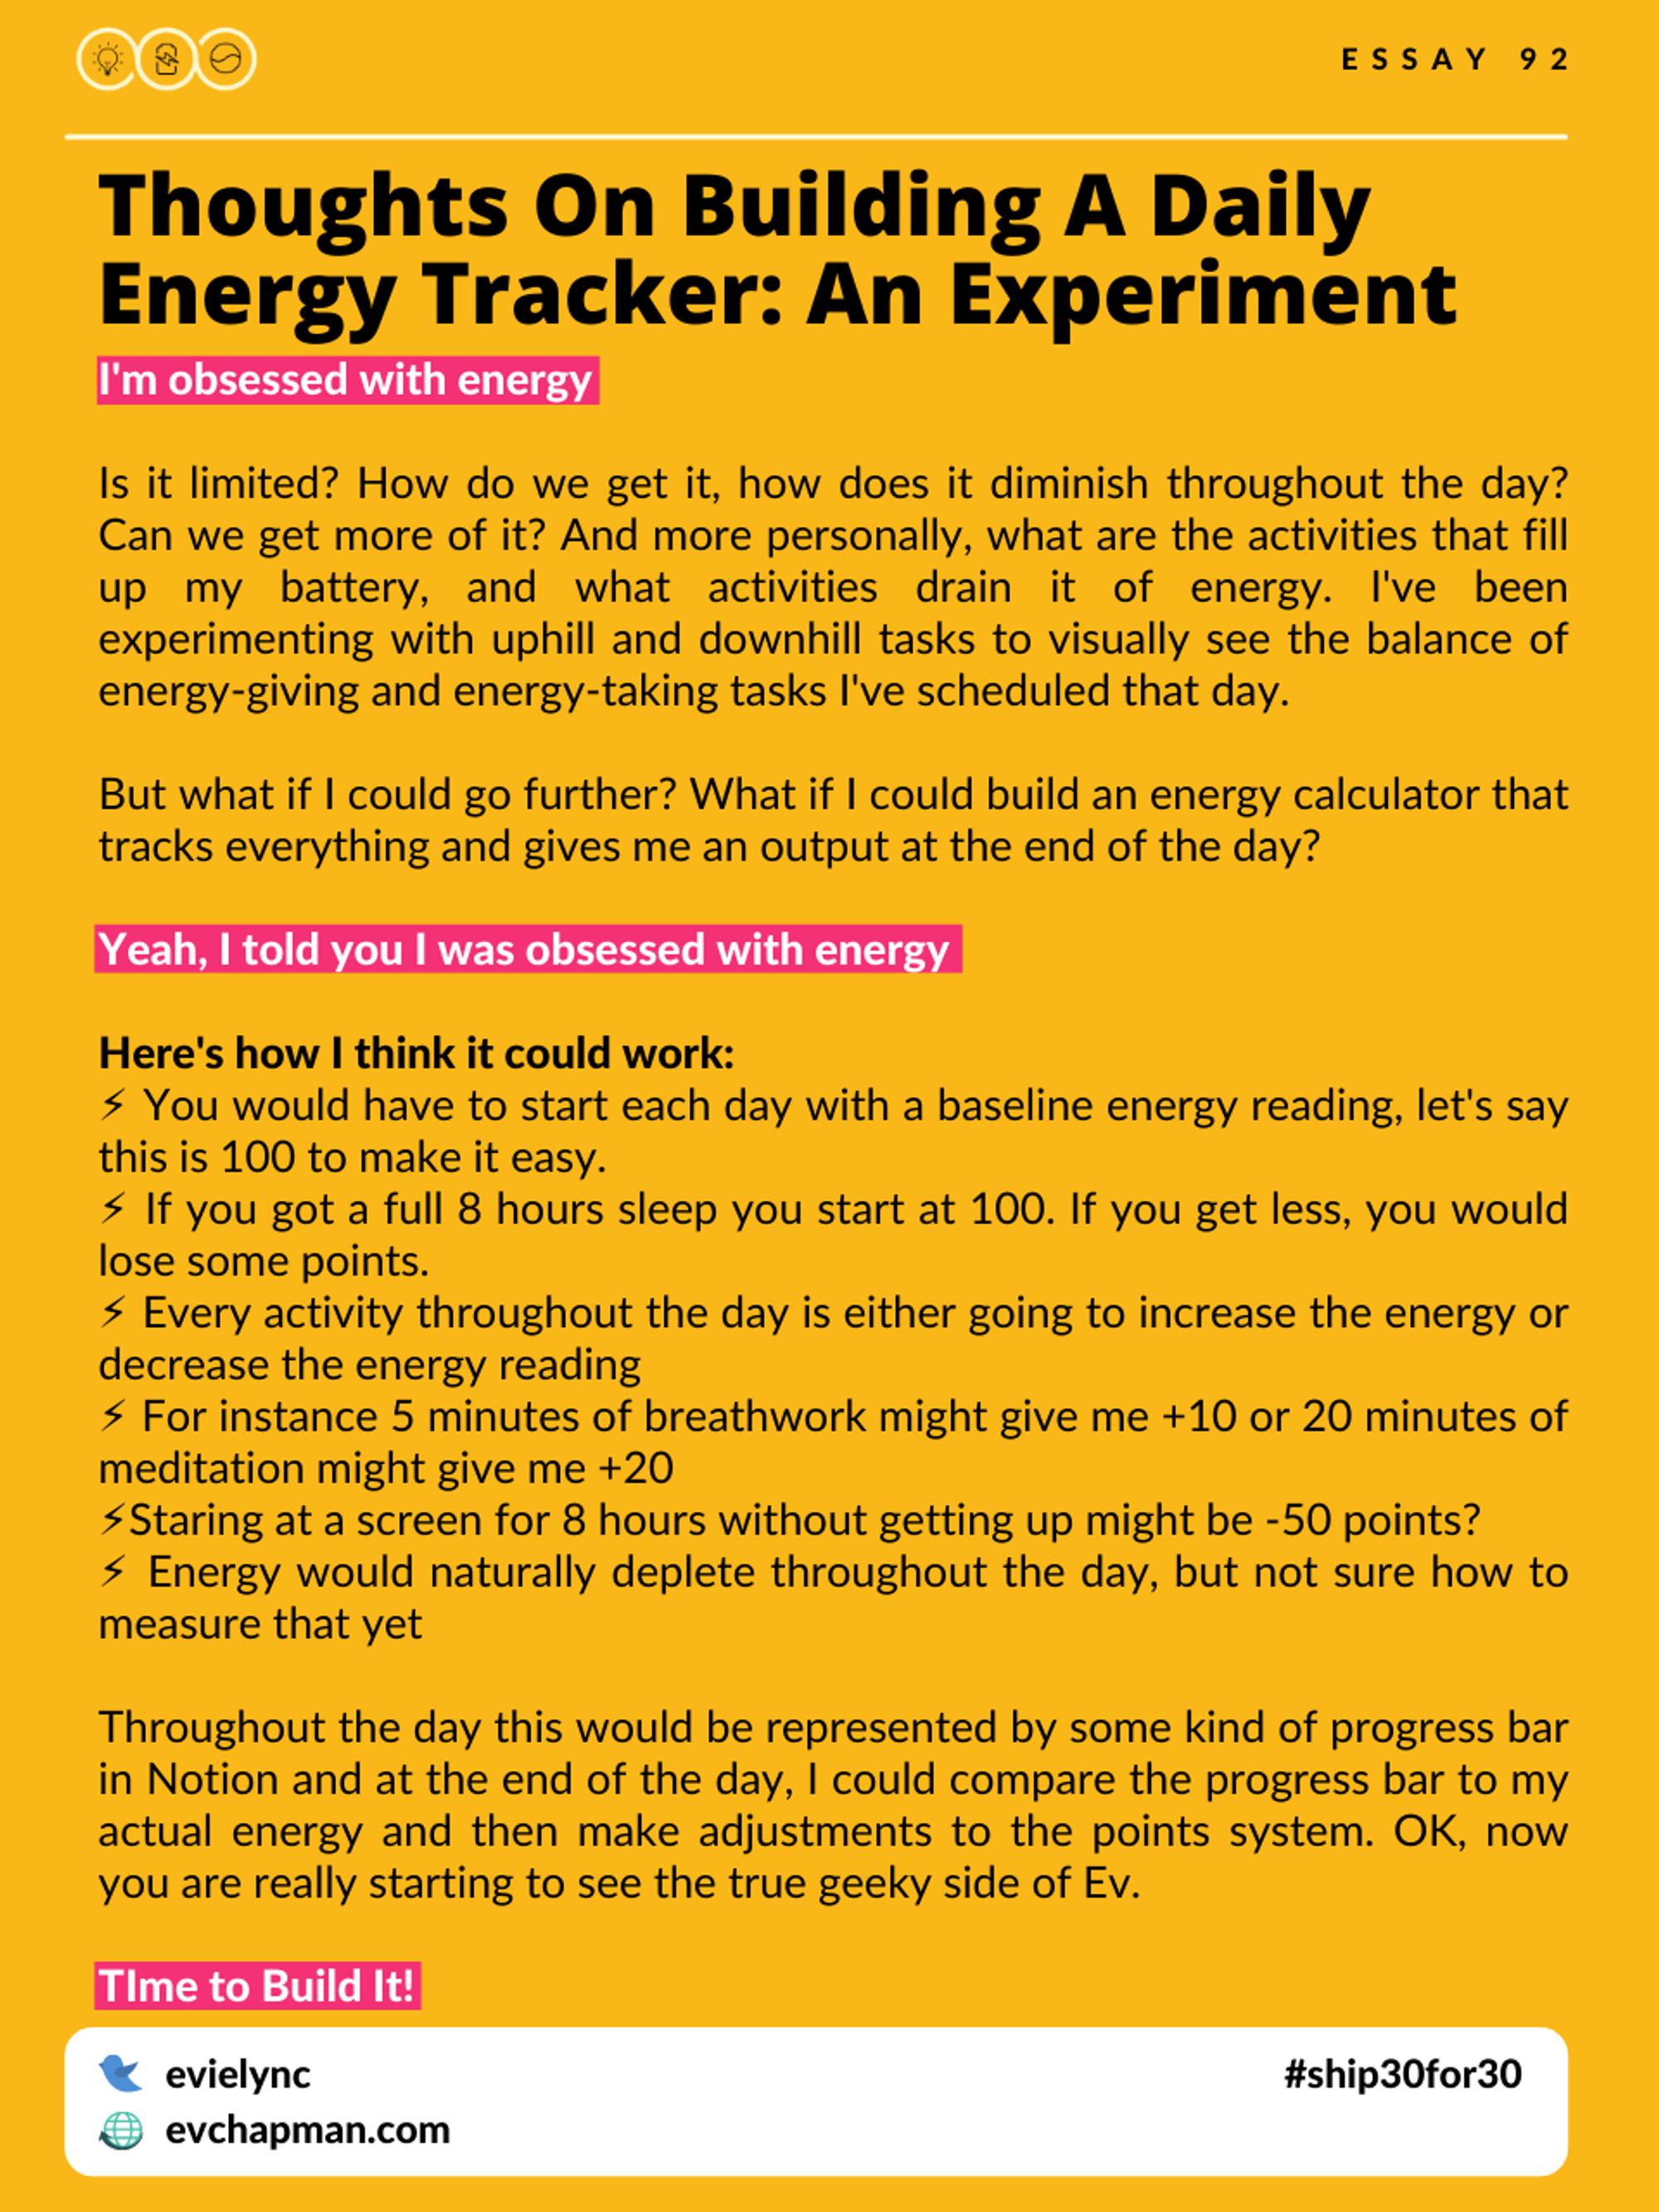 Thoughts On Building A Daily Energy Tracker: An Experiment